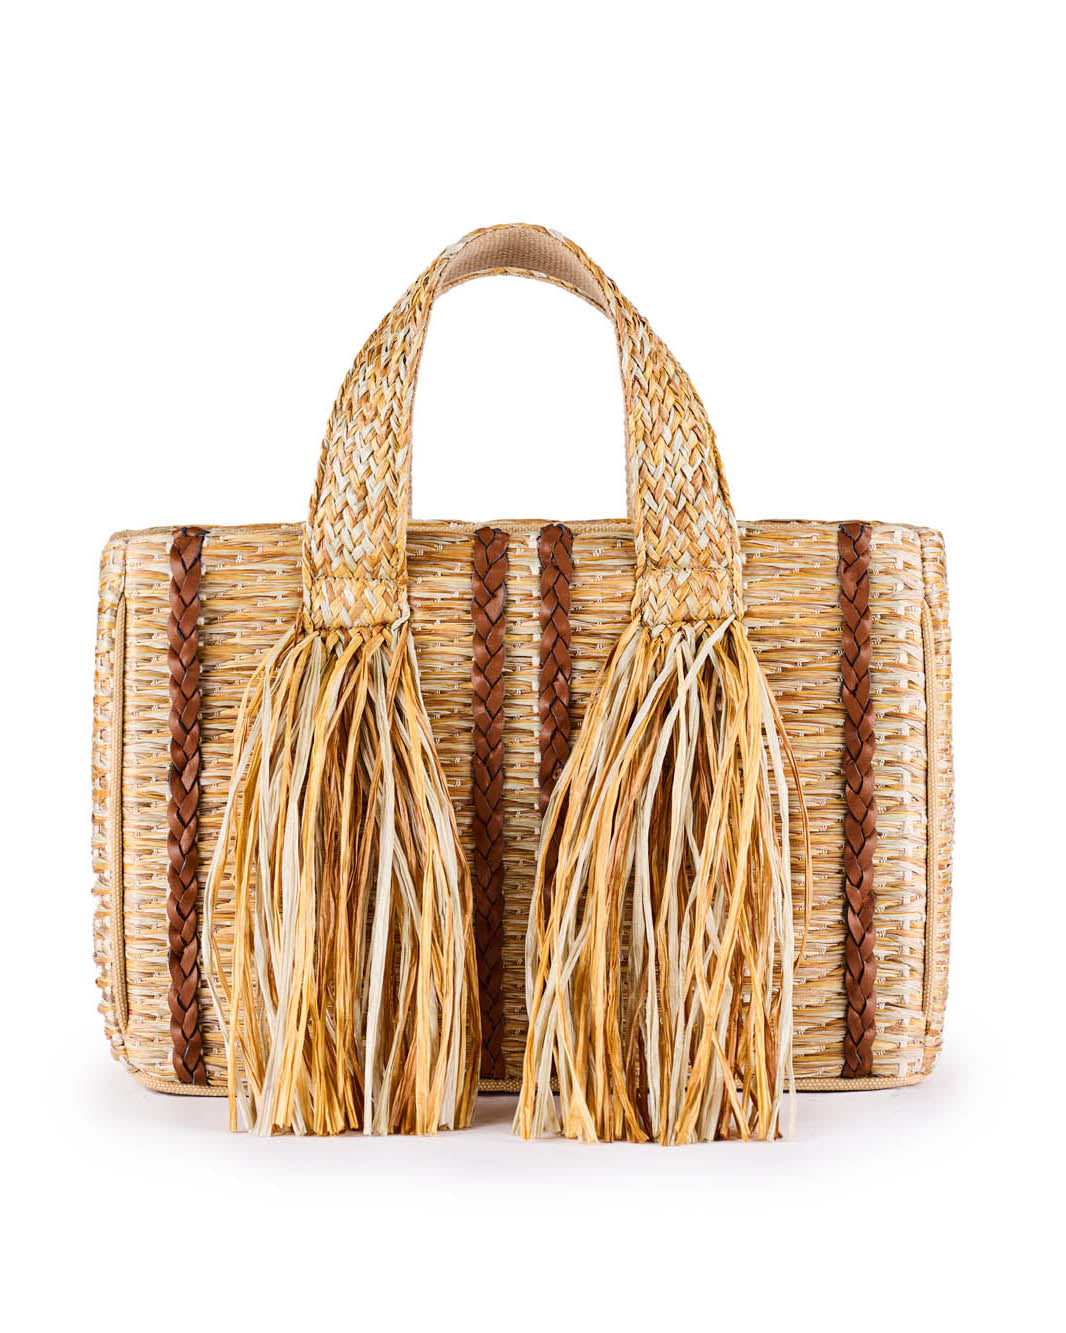 Handwoven straw tote bag with fringe details and brown accents